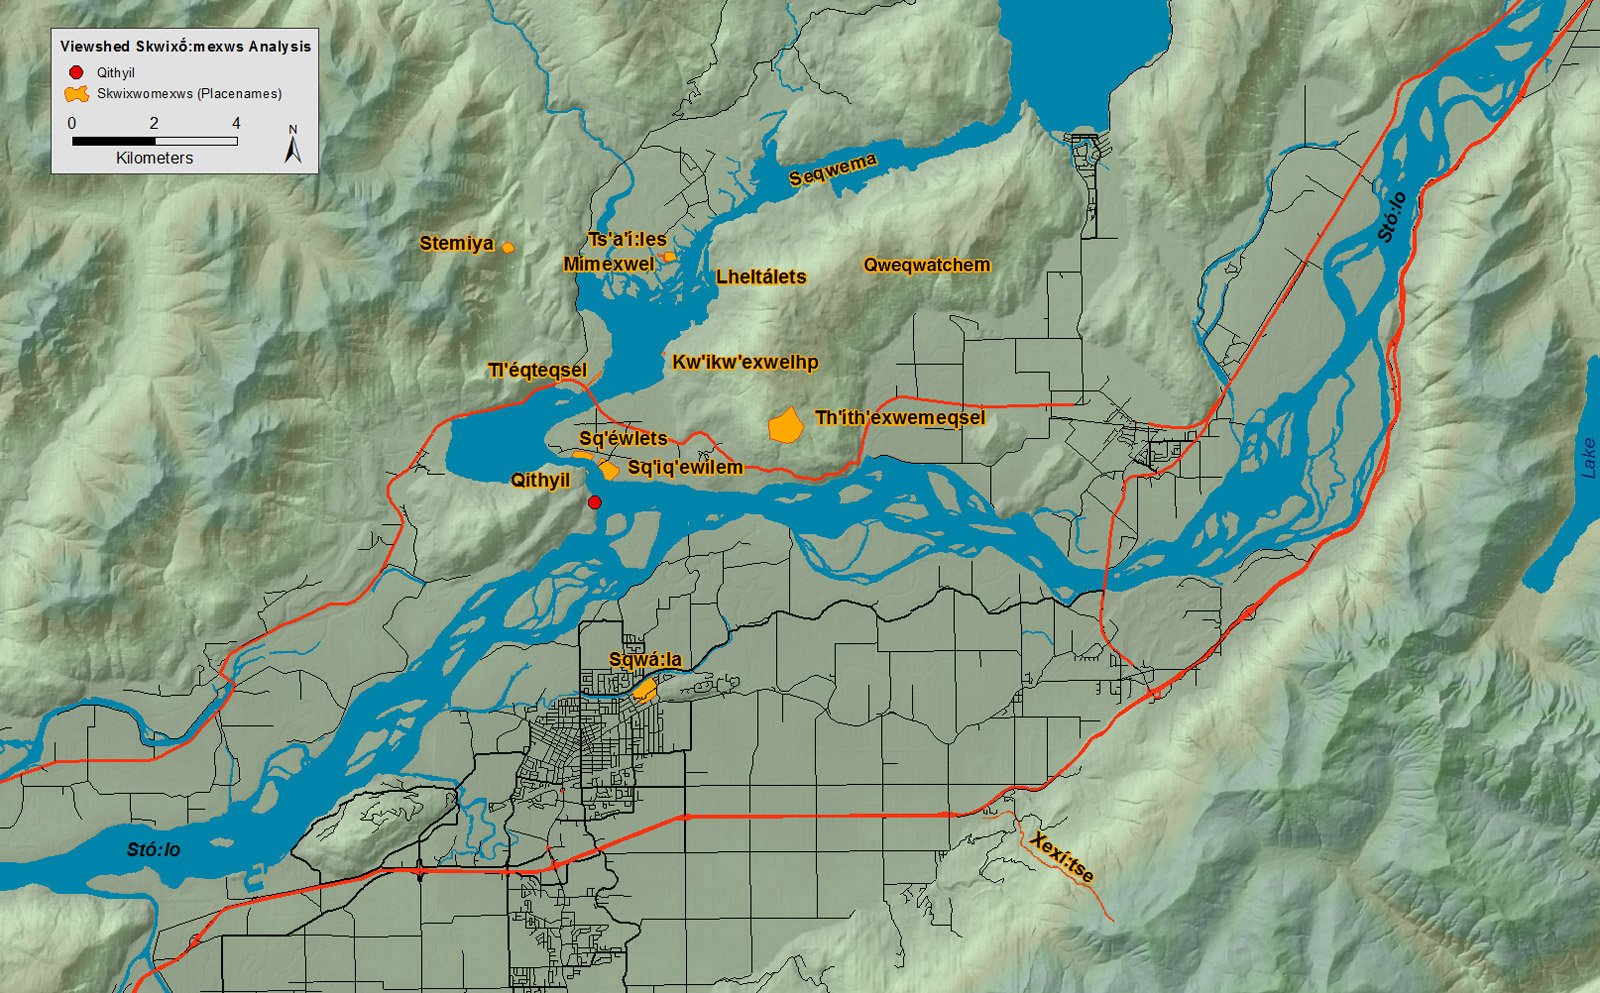 A map shows important cultural places that can be seen from where the Harrison and Fraser Rivers meet near the ancestral site Qithyil.